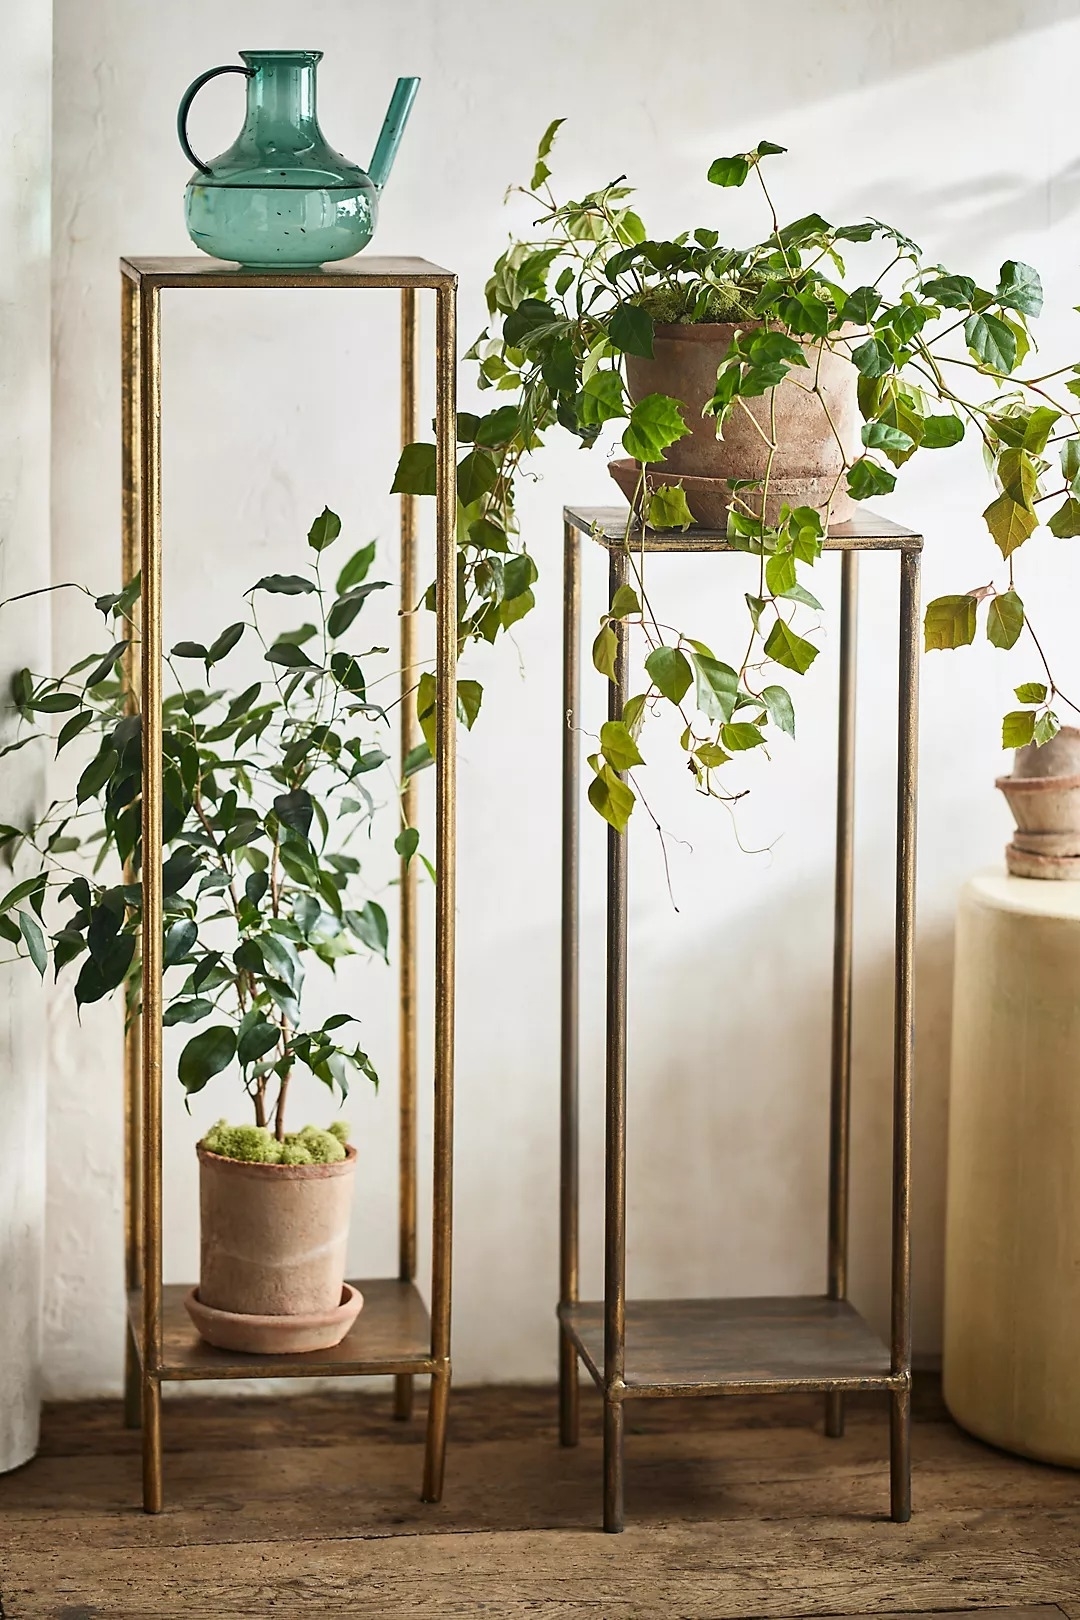 Two slender, metal plant stands of varying heights with potted plants for interior decor